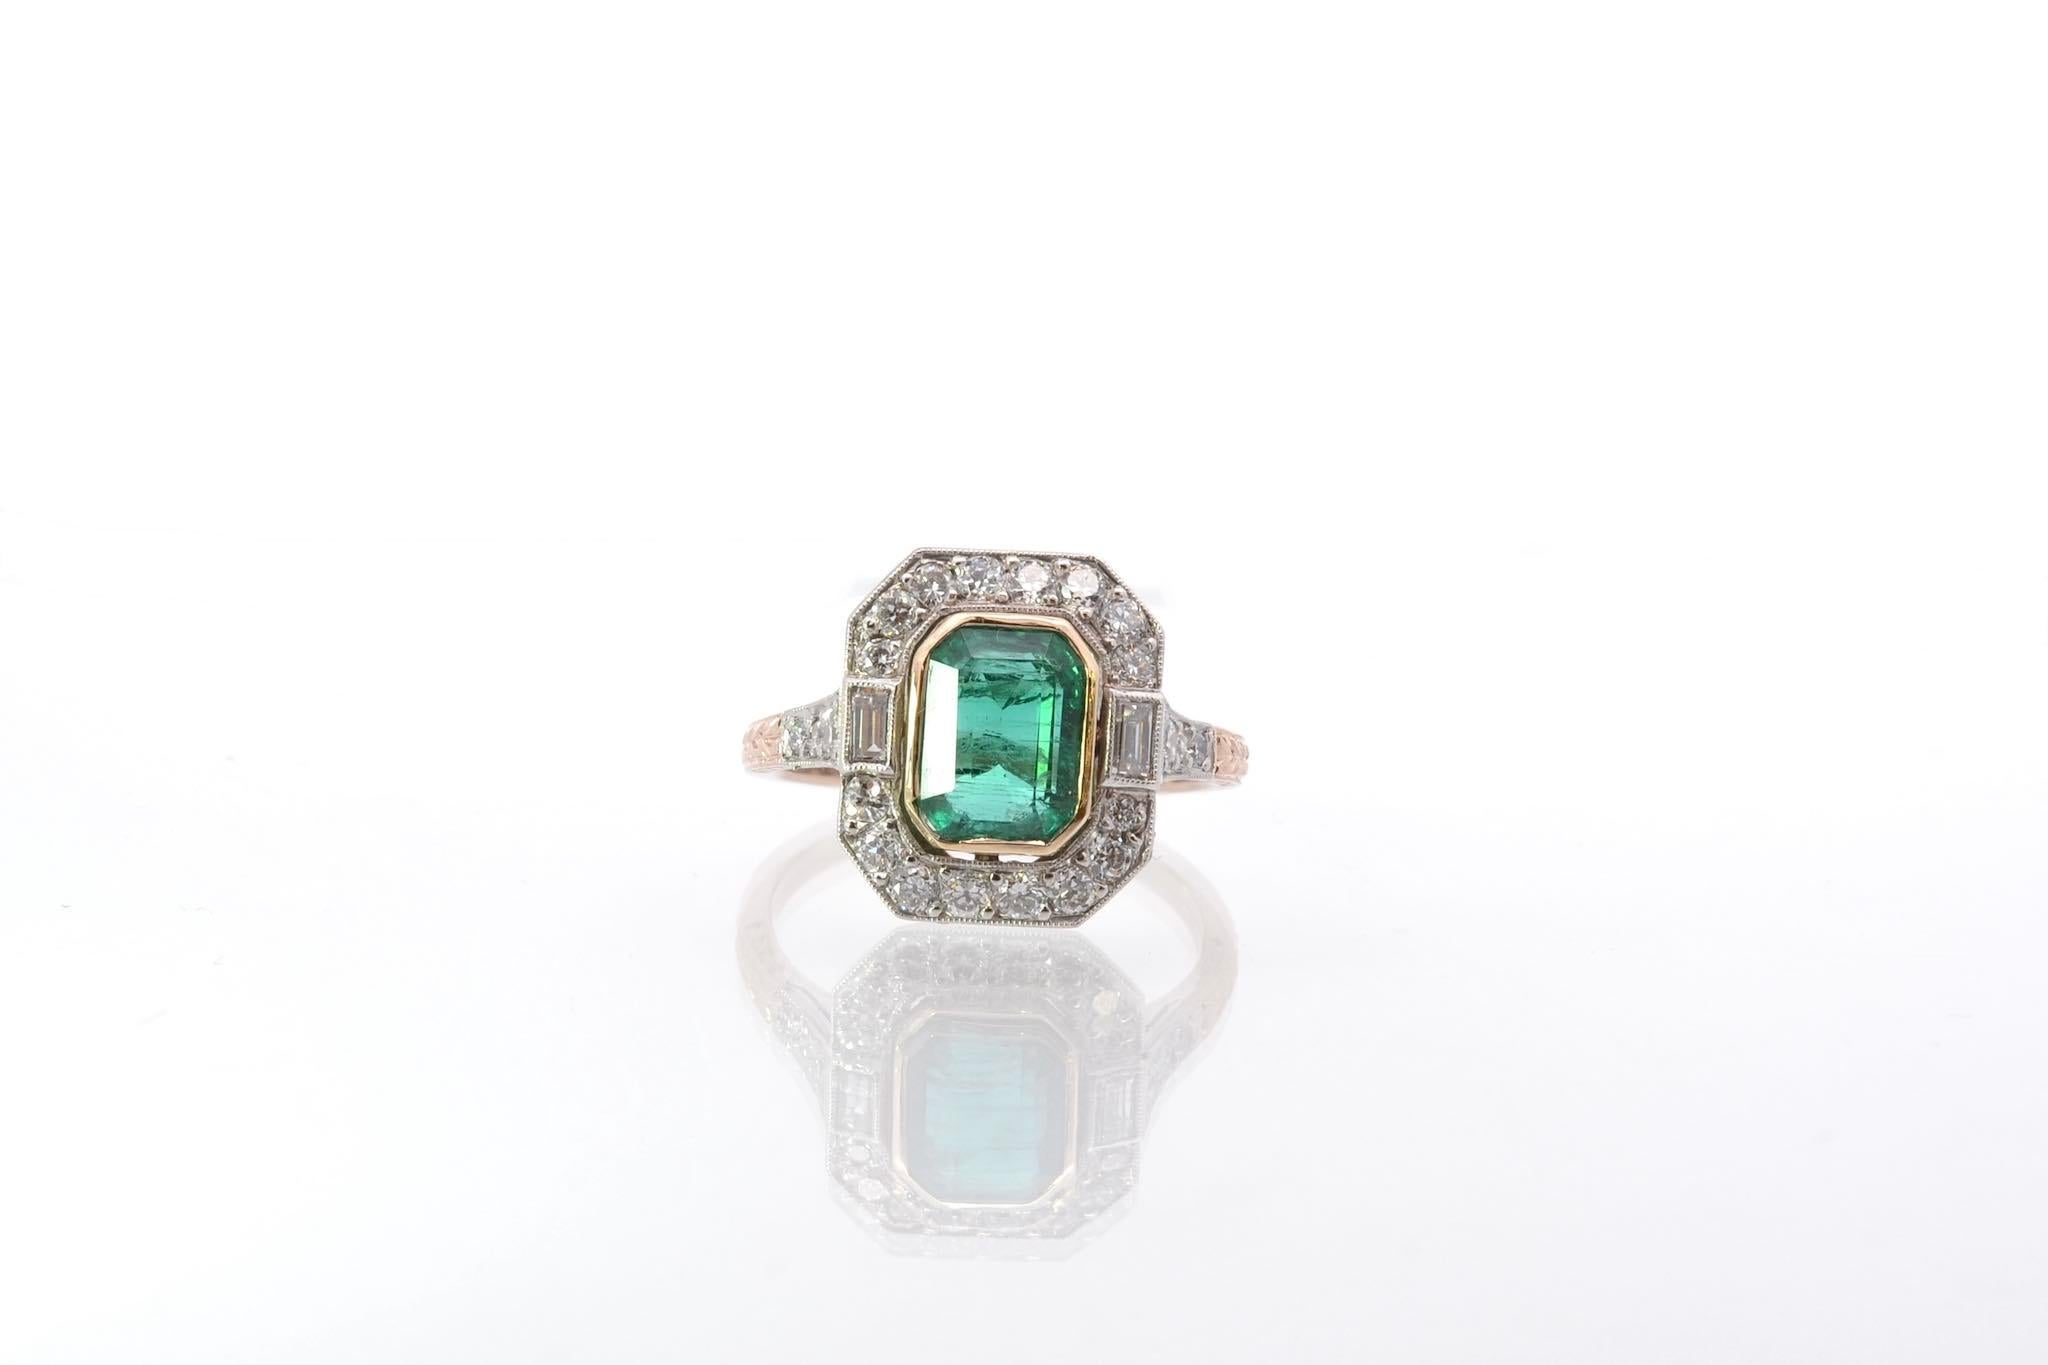 Stones: Emerald of 1.90 cts, 22 diamonds of 0.55 ct and 2 baguette diamonds of 0.20 ct
Material: Platinum and 18k rose gold
Dimensions: 1.4 x 1.2cm
Weight: 4gr
Period: Recent vintage art deco style
Size: 52 (free sizing)
Certificate
Ref. : 25556